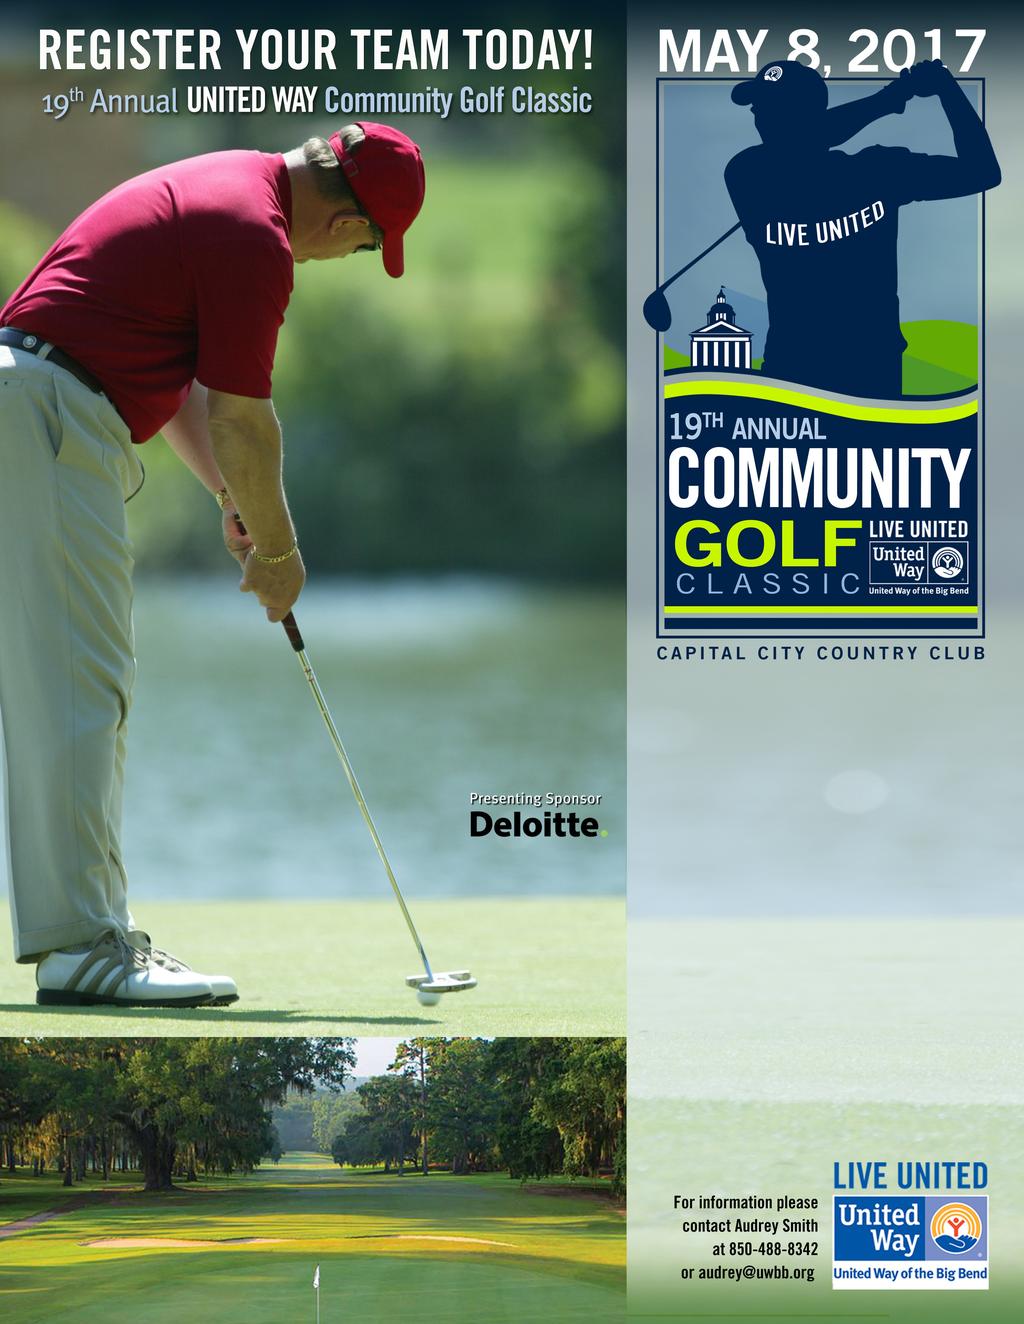 Deloitte and United Way of the Big Bend invite you to be one of 22 teams